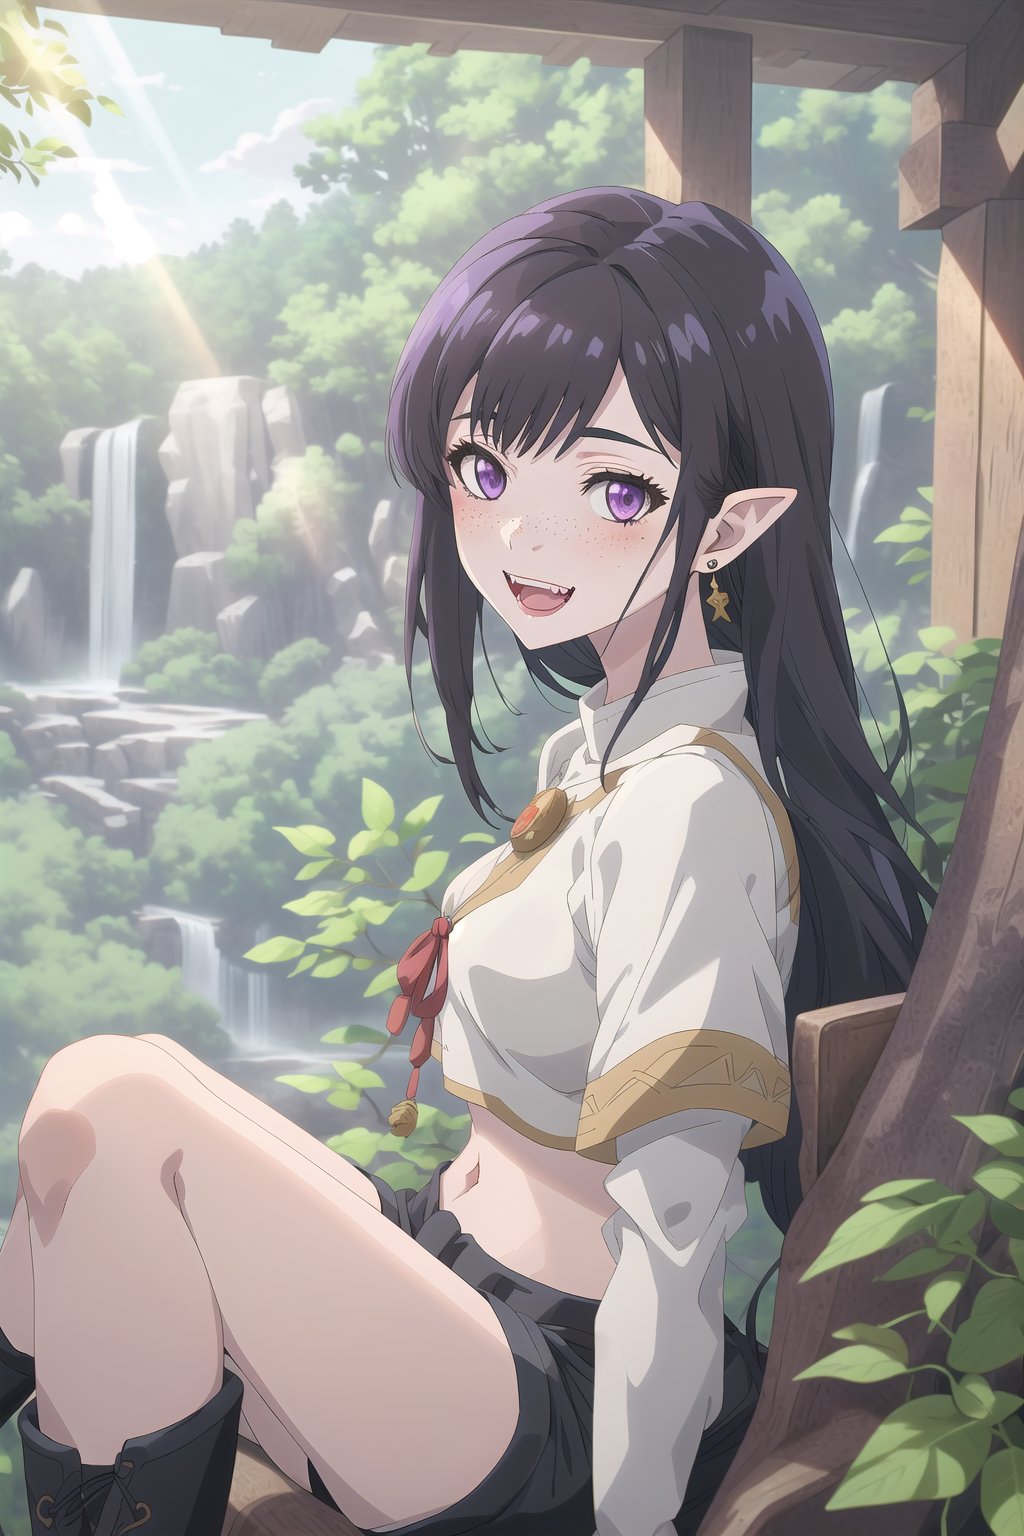 nier anime style illustration, best quality, masterpiece High resolution, good detail, bright colors, HDR, 4K. Dolby vision high. 

Archer elf girl with long straight black hair (hair on shoulders), purple eyes, freckles, blushing, purple earrings

Dark brown medieval fantasy style crop top

Showing navel, exposed navel 

Medieval fantasy dark brown shorts 

Elegant black medieval fantasy style boots 

apple tree forest 

Sunrise 

Intense sun rays between the trees

waterfalls in the distance

Flirty smile (Yandere smile). Happy, excited. Open mouth

Showing fangs, exposed fangs

Selfie,nier anime style

Sitting,nier anime style

Black hair ,nier anime style